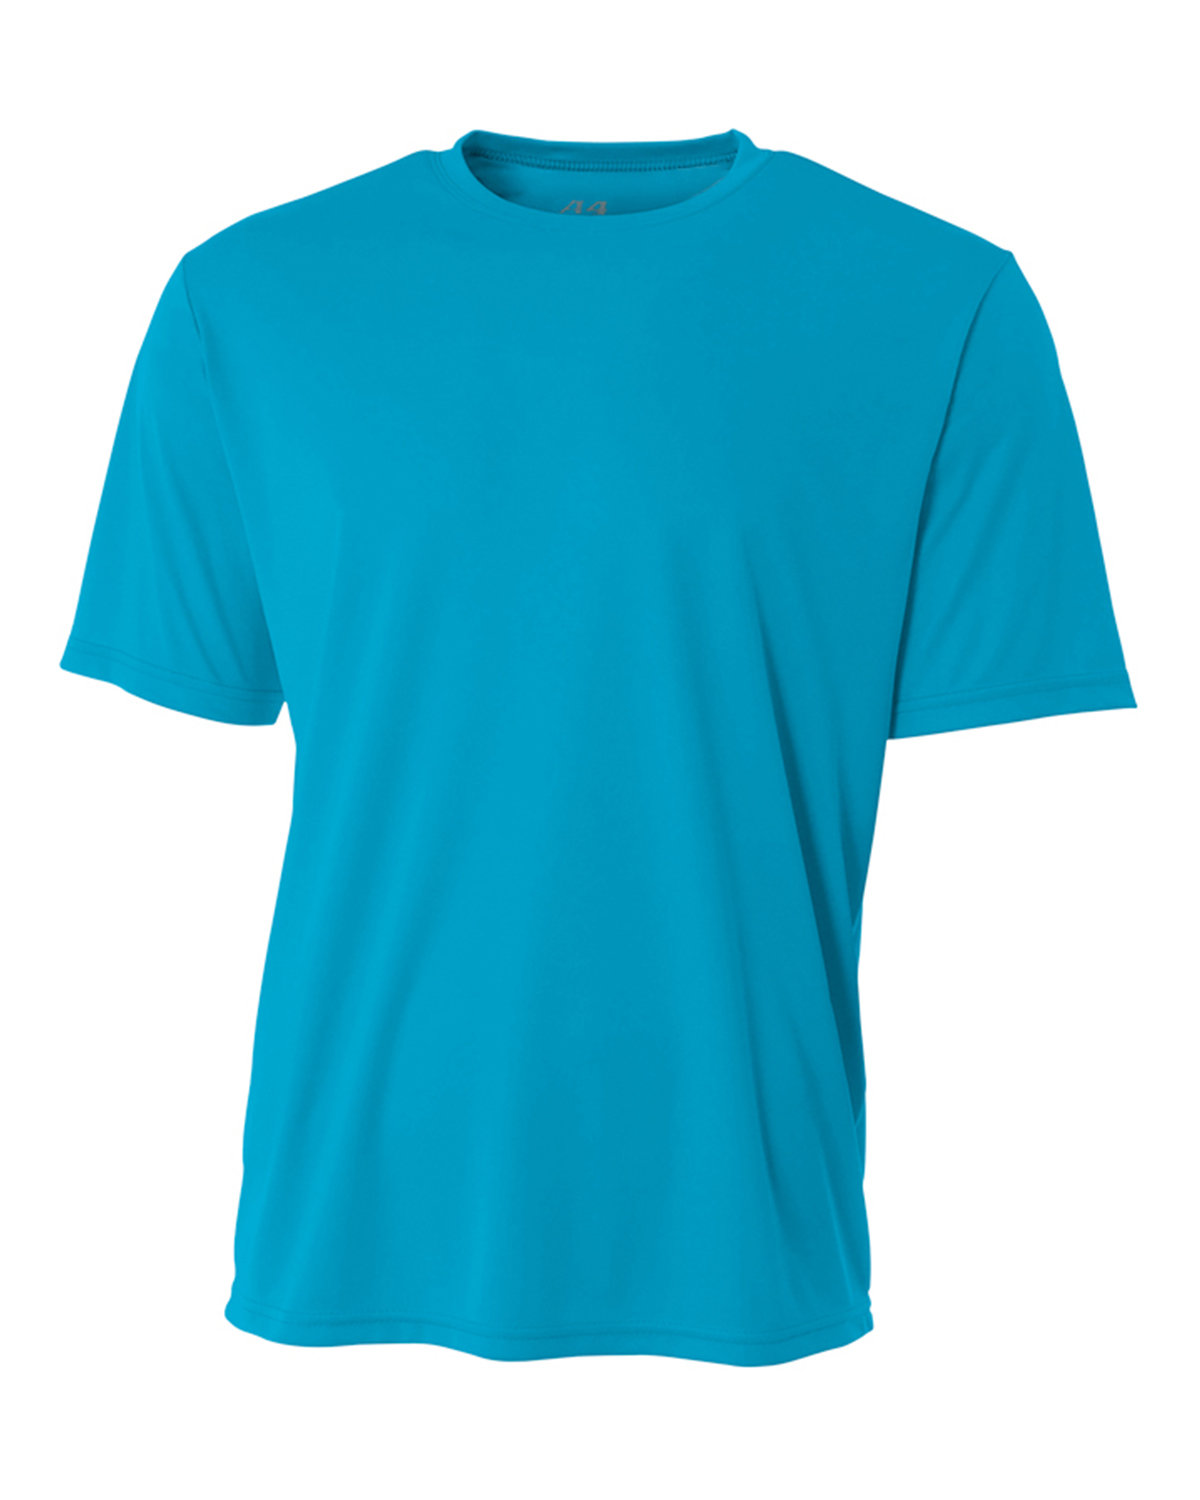 cooling athletic shirts